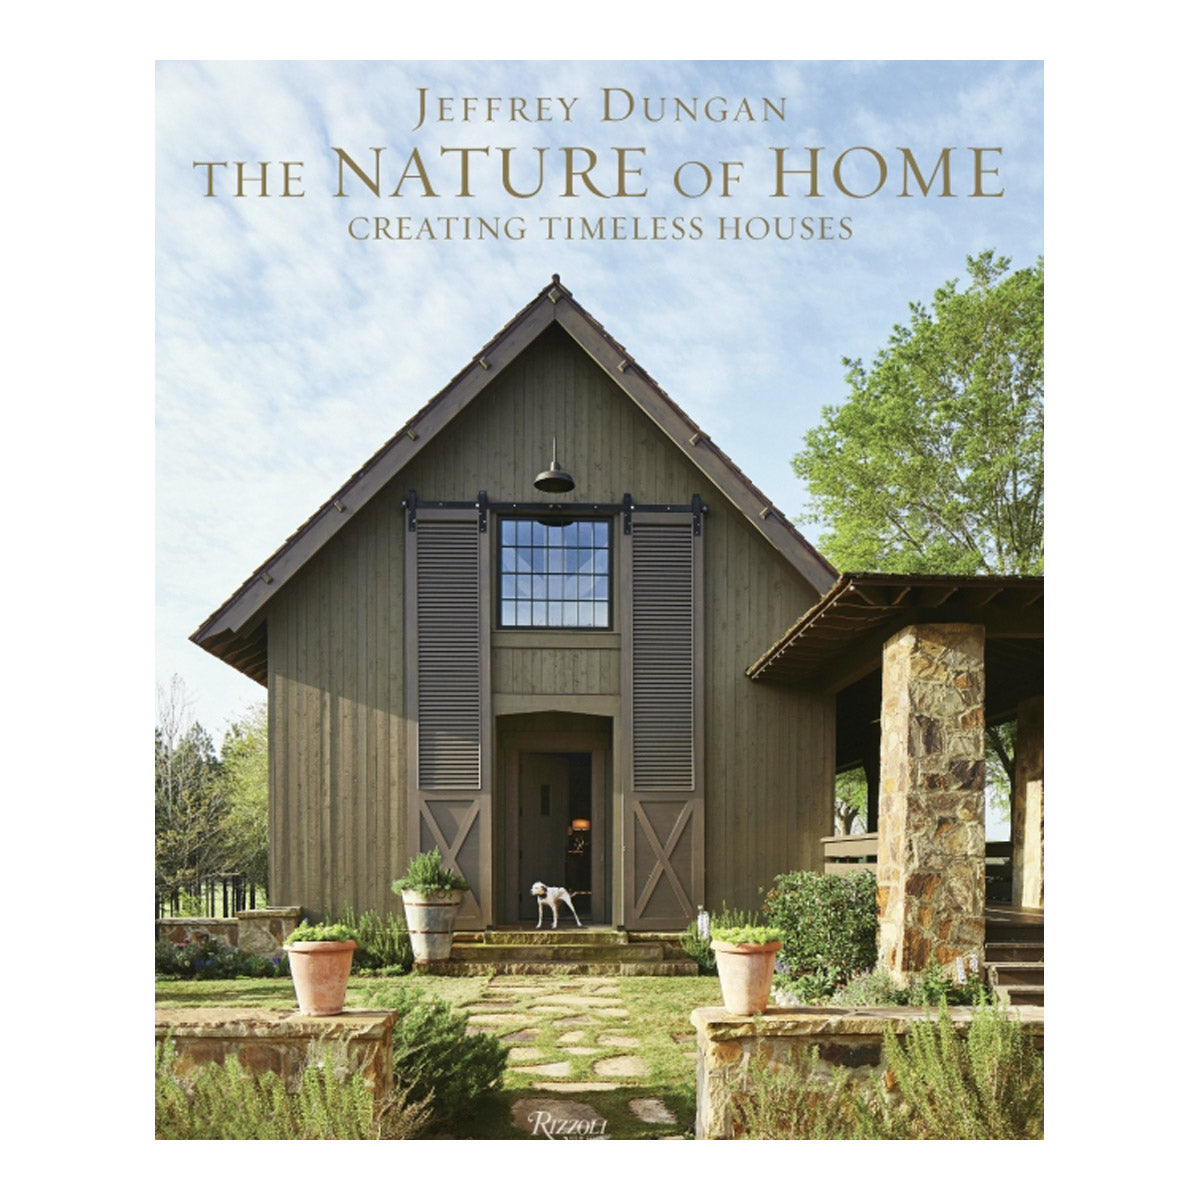 The Nature of Home: Creating Timeless Houses